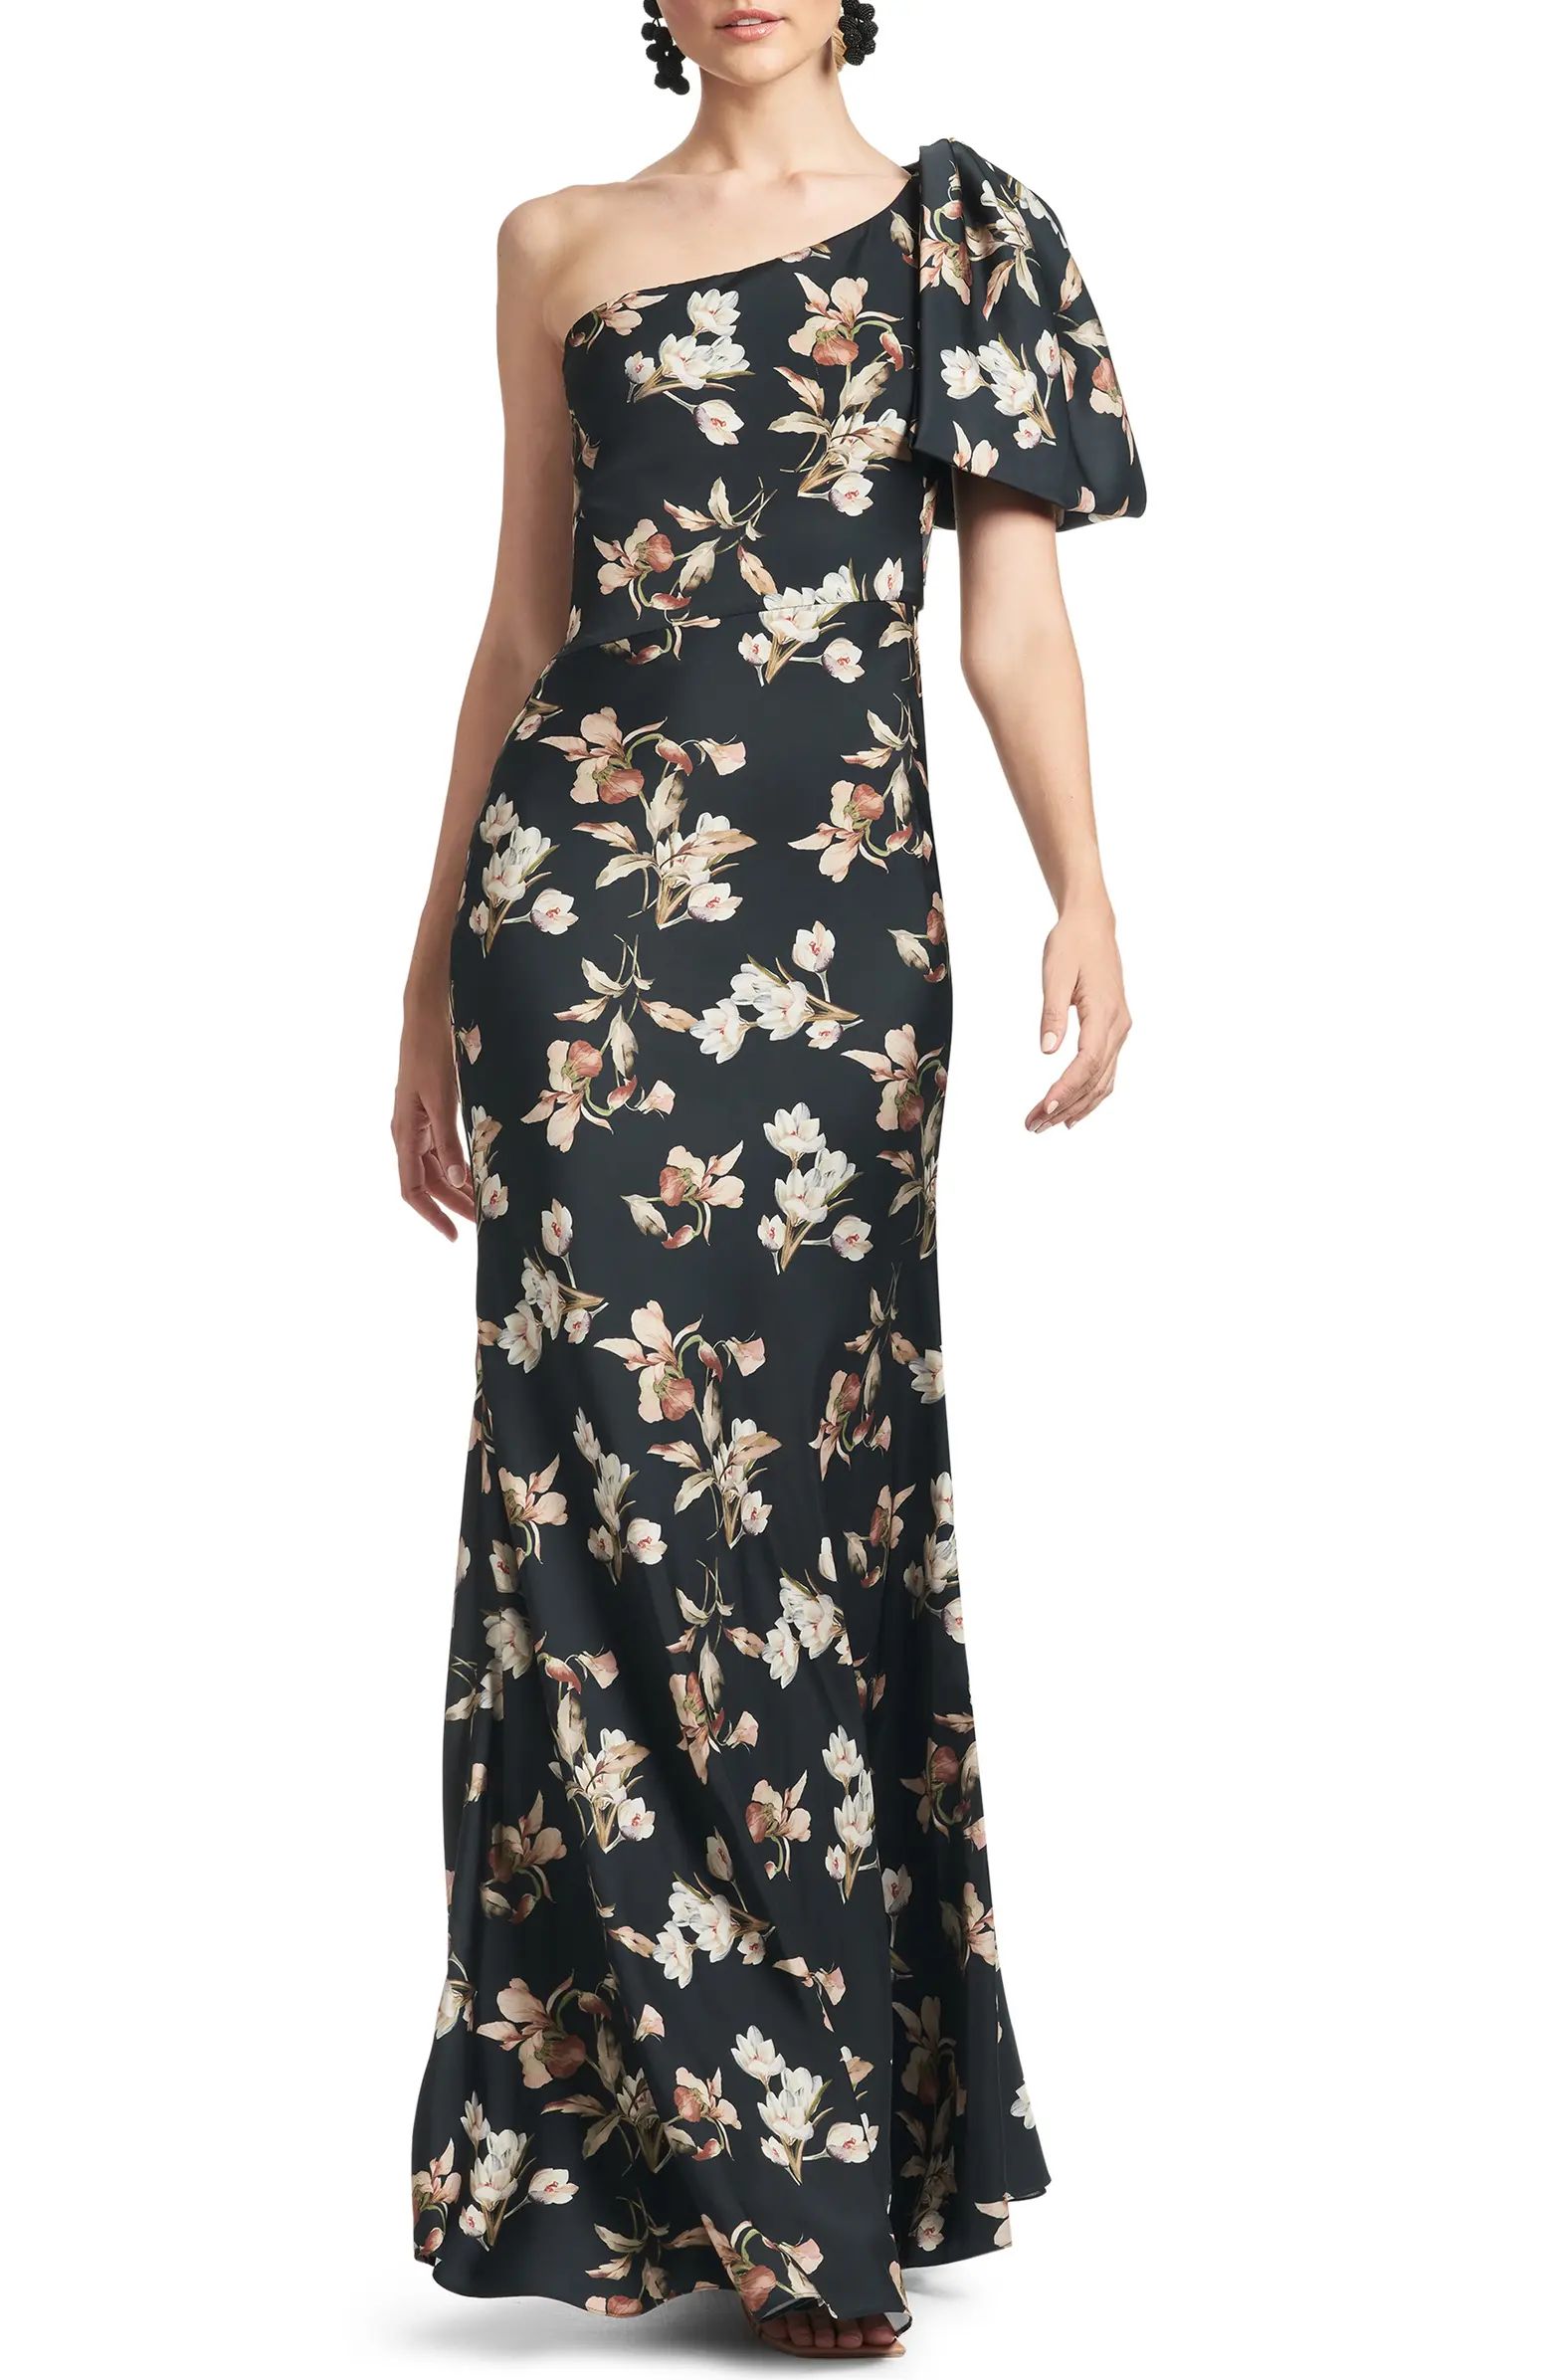 Aubrey One-Shoulder Floral Satin Charmeuse Body-Con Gown | Nordstrom